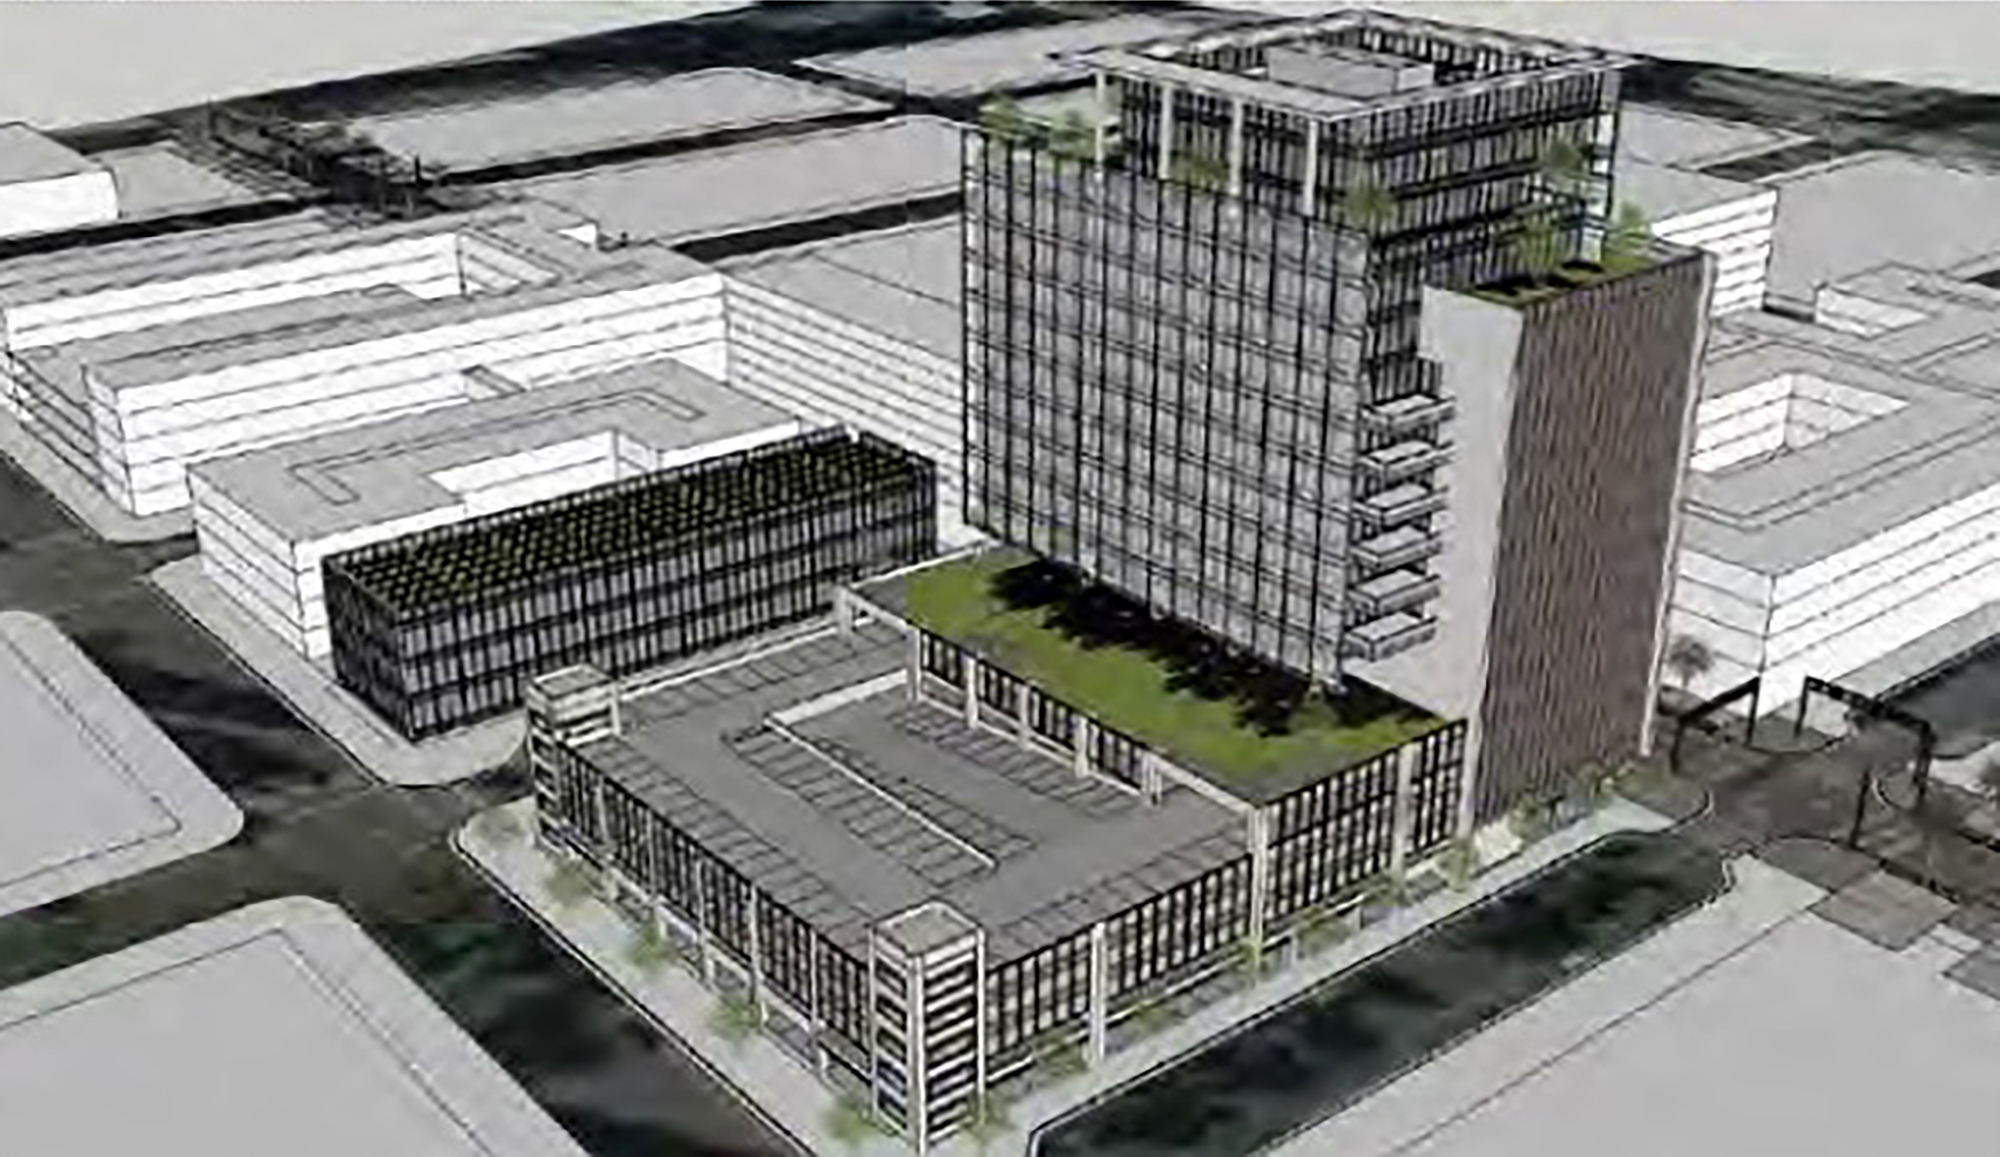 Four-block footprint: A proposal by developer Steve Atkins would retrofit and expand the utility’s current headquarters at 21 W. Church St.